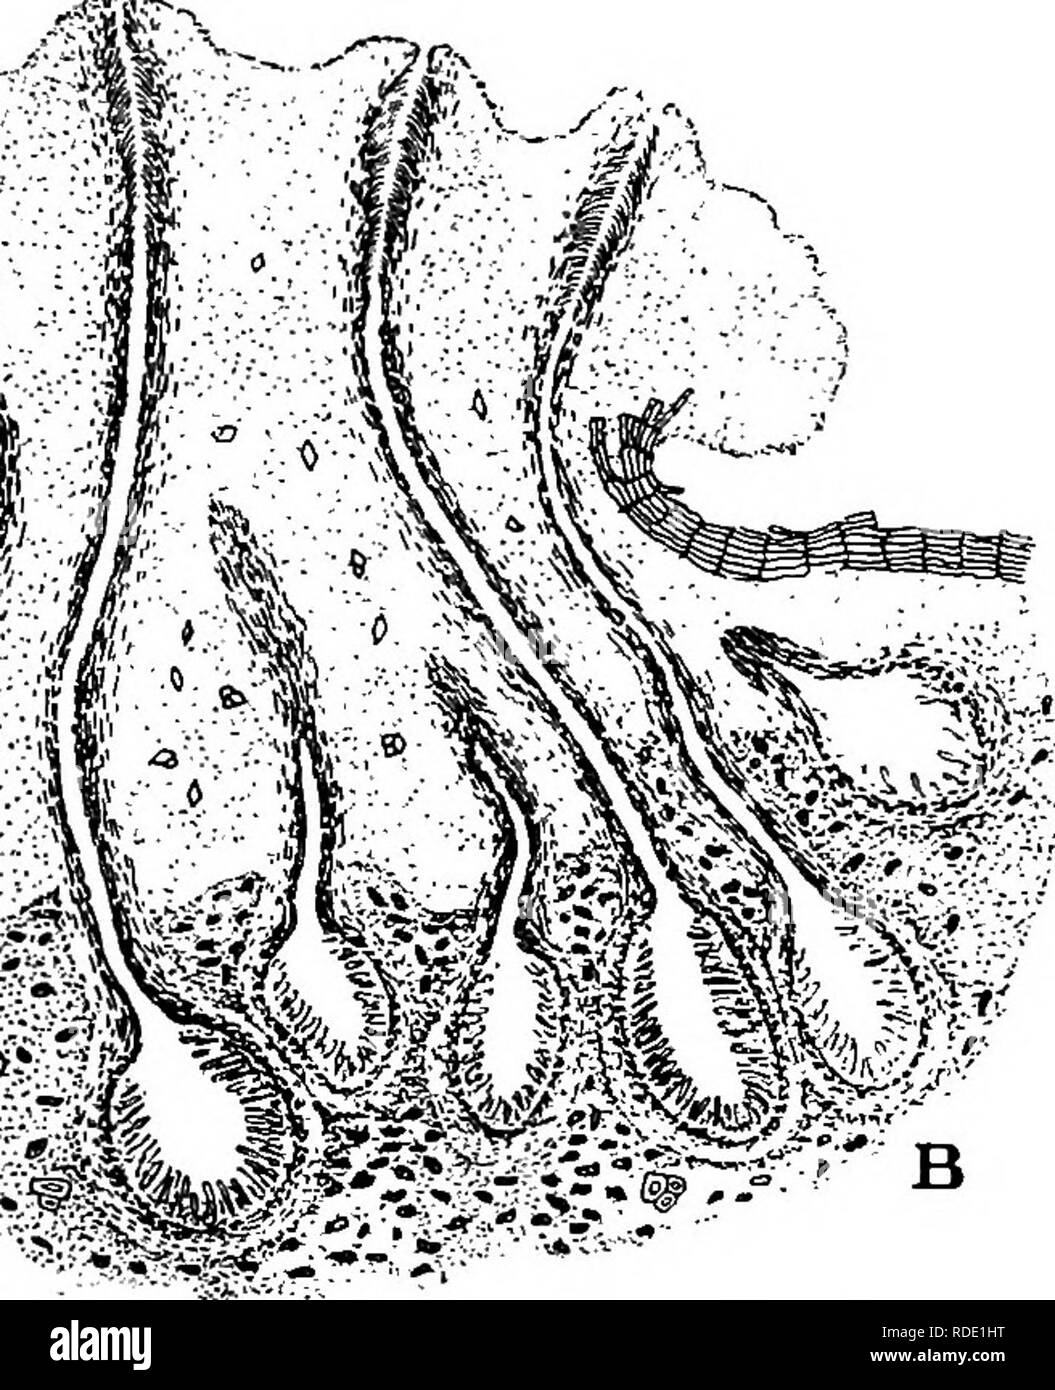 . A text-book of mycology and plant pathology . Plant diseases; Fungi in agriculture; Plant diseases; Fungi. %: &gt;^--. Fig. 176.—A, Vertical section of a pycnidial pustule. The filaments lining the cavity produce the spores that ooze out as &quot; spore-horns;'' B, vertical section of a perithecial pustule. Several of the perithecia are cut so as to show the fulllengths of the necks in the chestnut blight fungus (Endothia parasitica). (After Heald, F. D., Bull. 5, Chestnut Tree Blight Com., 1913.) ture, as well as moisture. There was no expulsion of ascospores under field conditions from lat Stock Photo